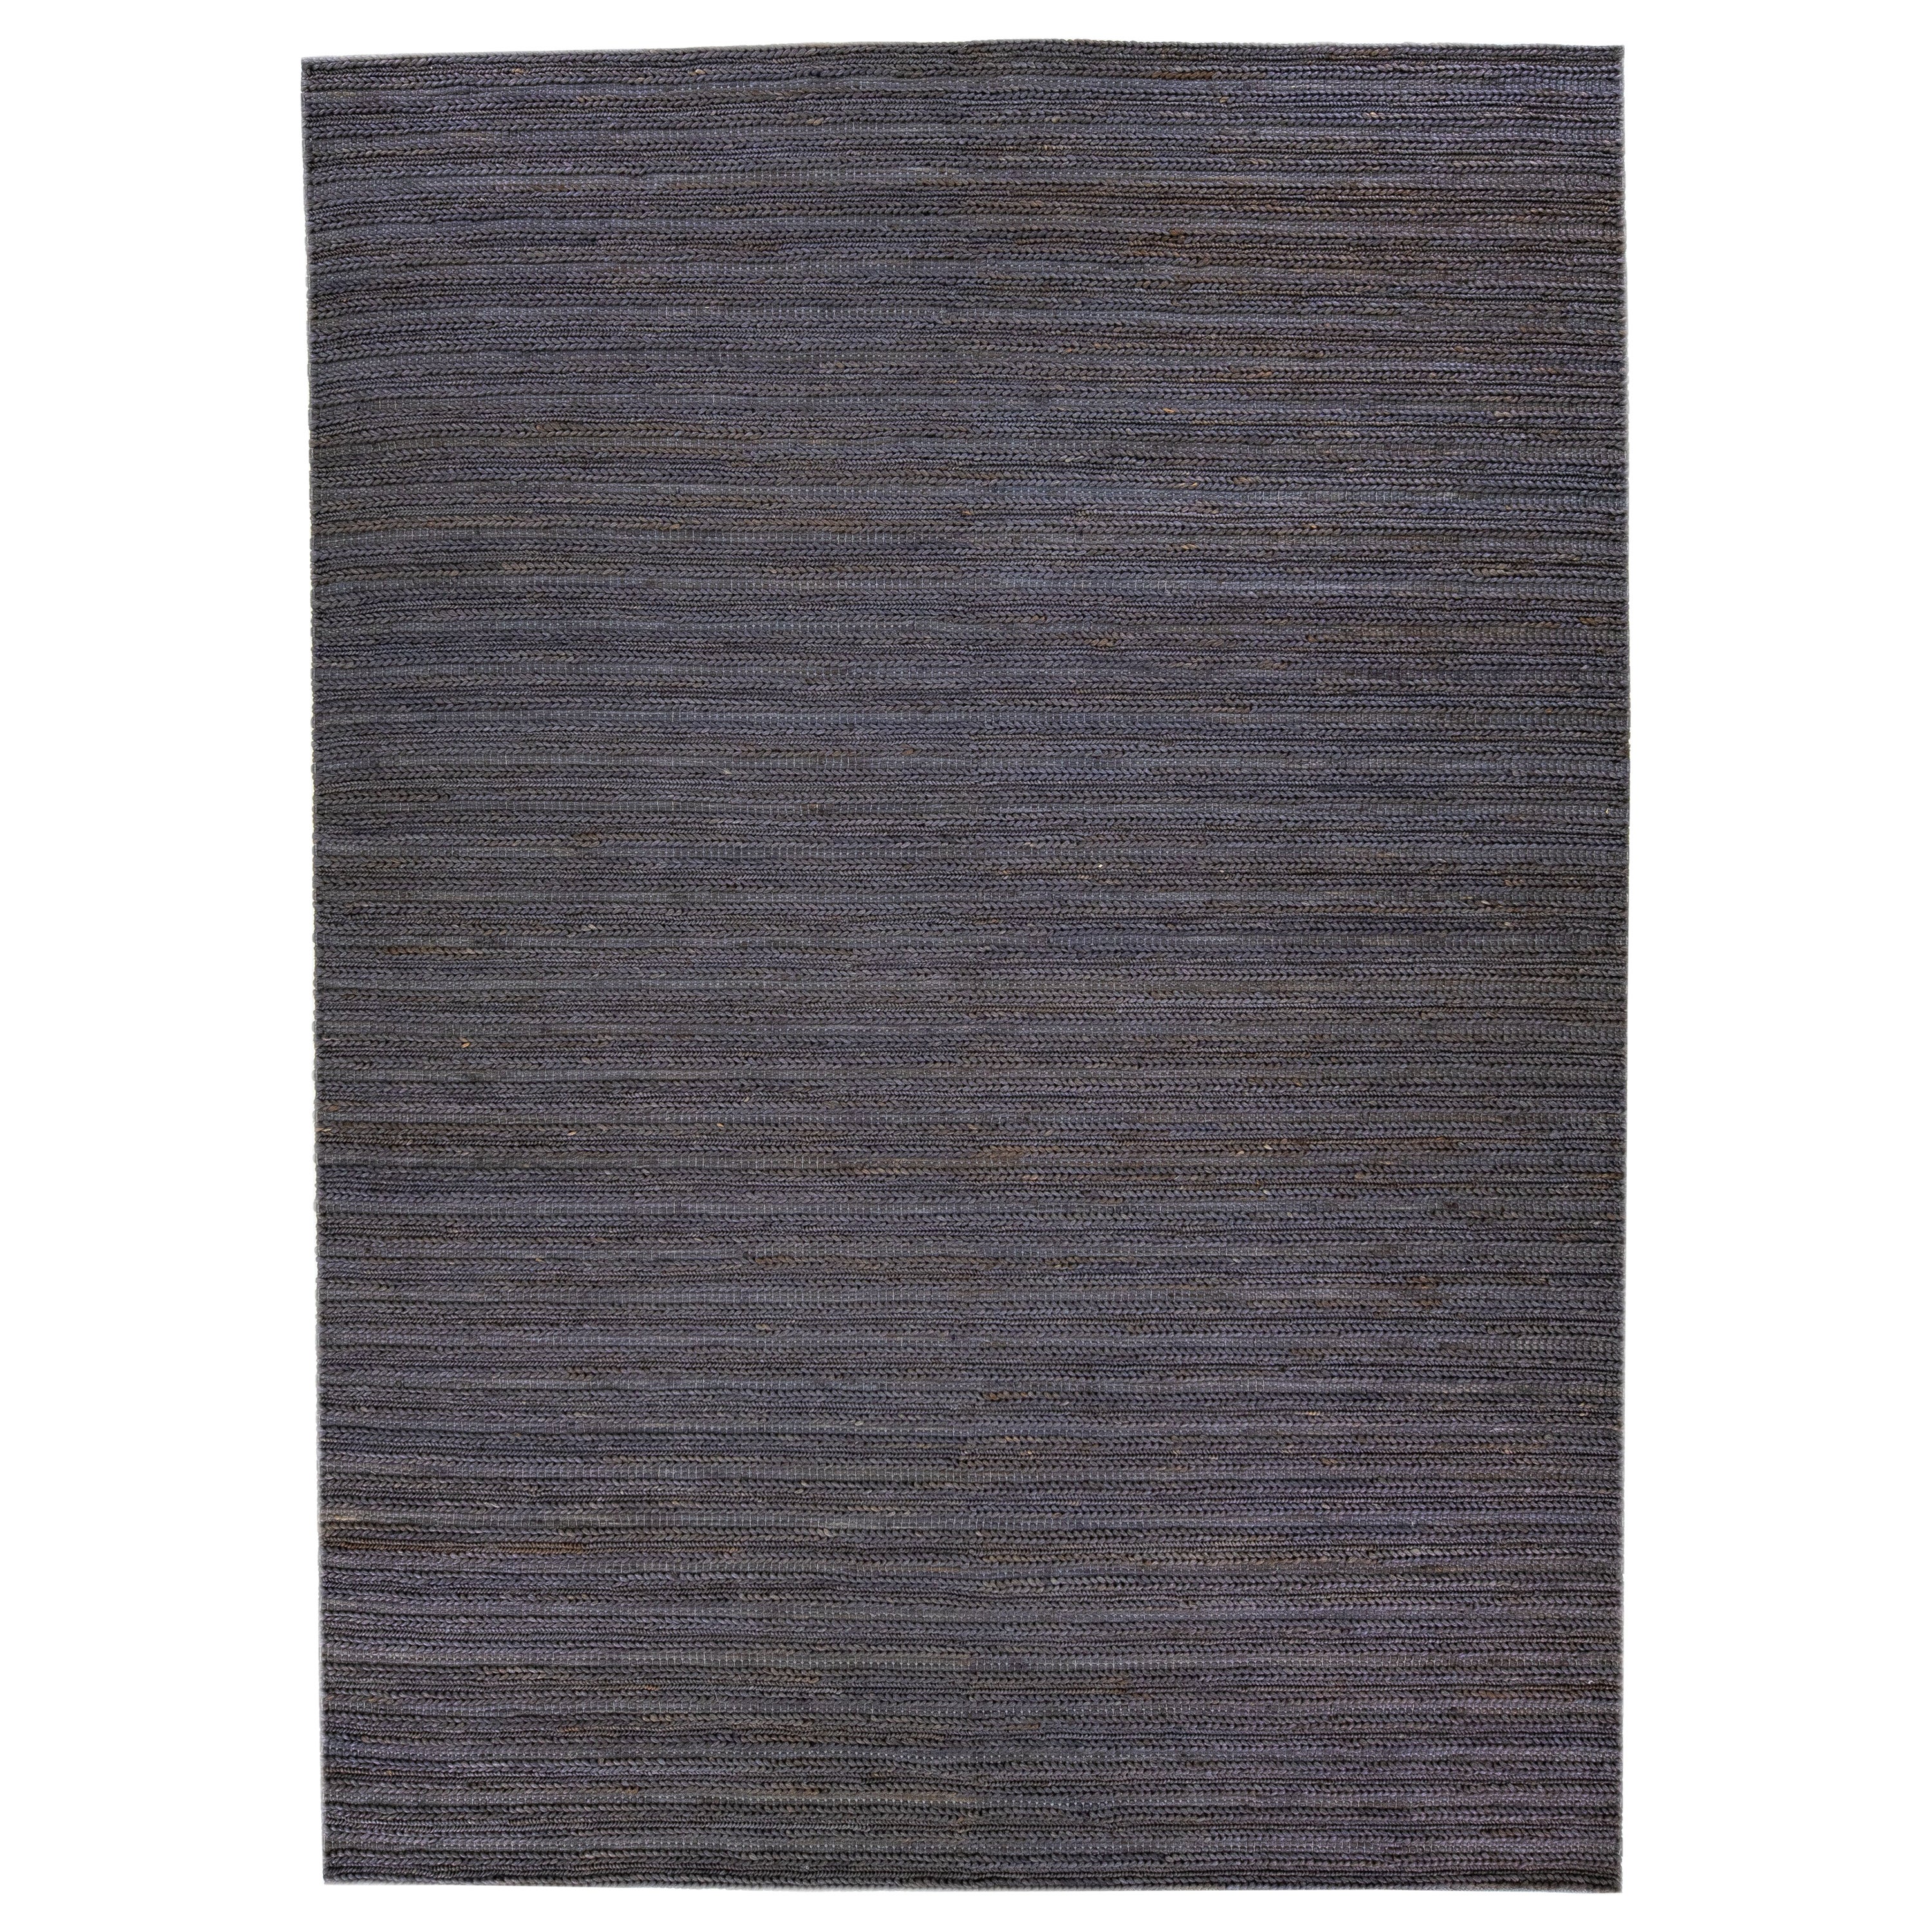 Modern Natural Texture Hand Woven Jute & Cotton Area Rug with Grey-Onyx Color For Sale